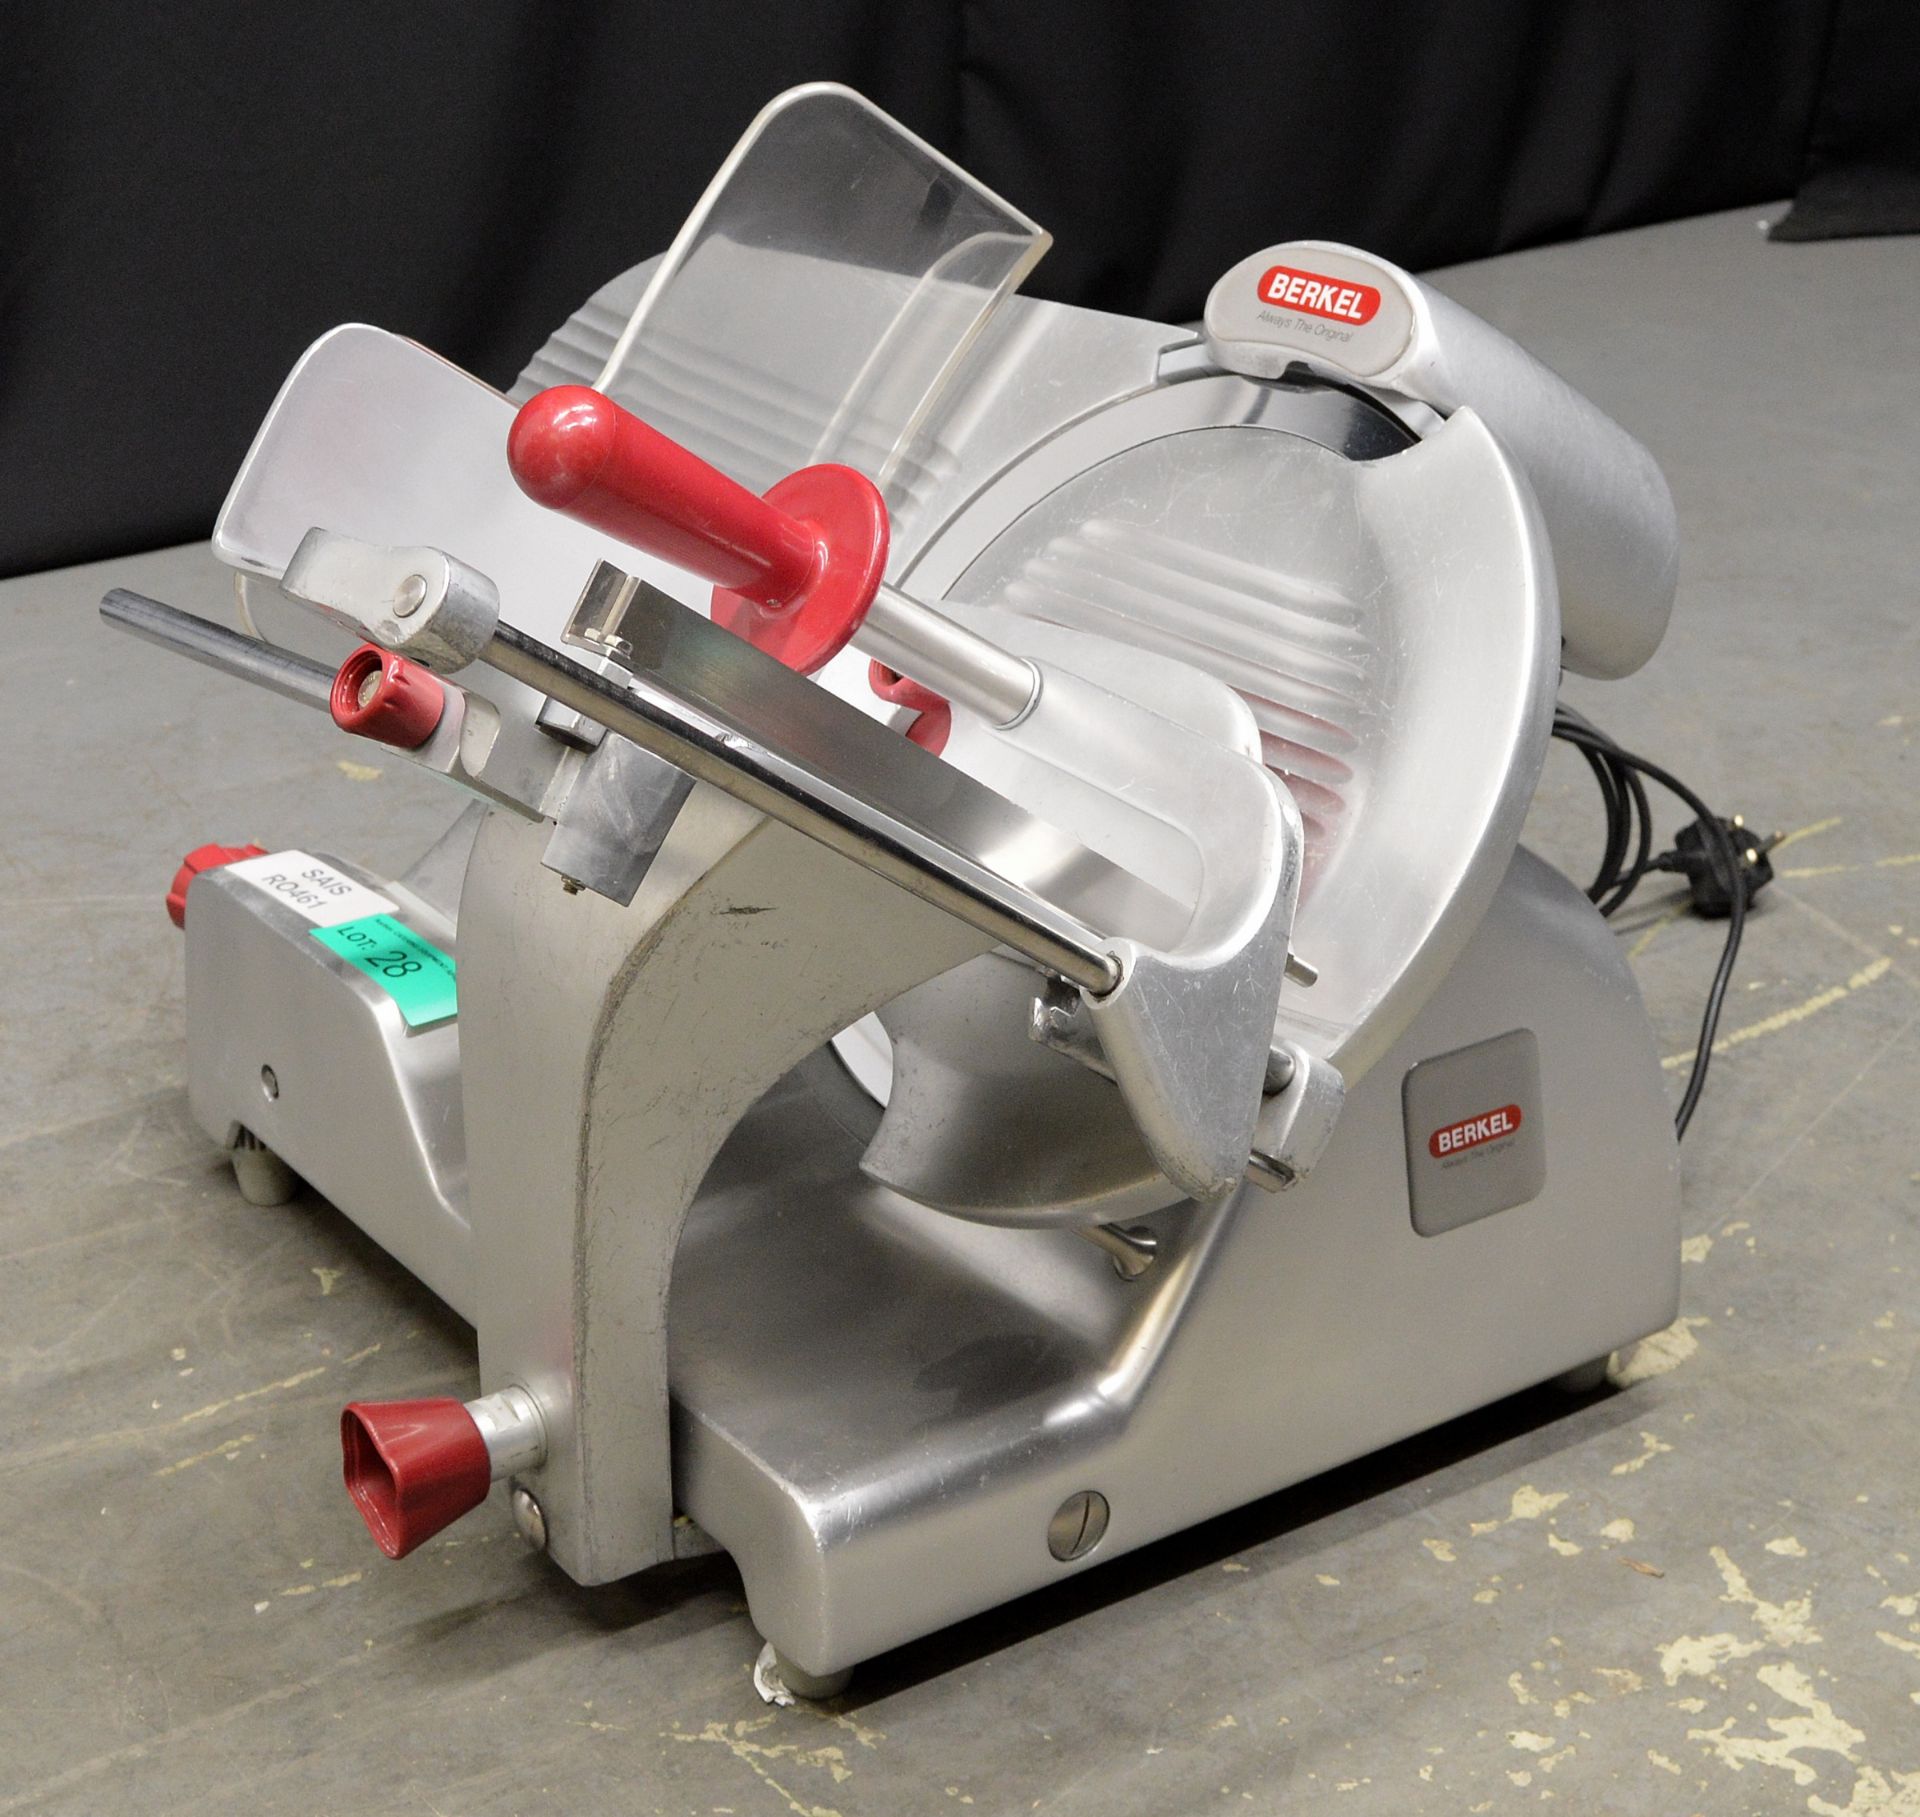 Berkel BSPGL04011A0F 12" Commercial Cooked Meat / Bacon Slicer, single phase electric